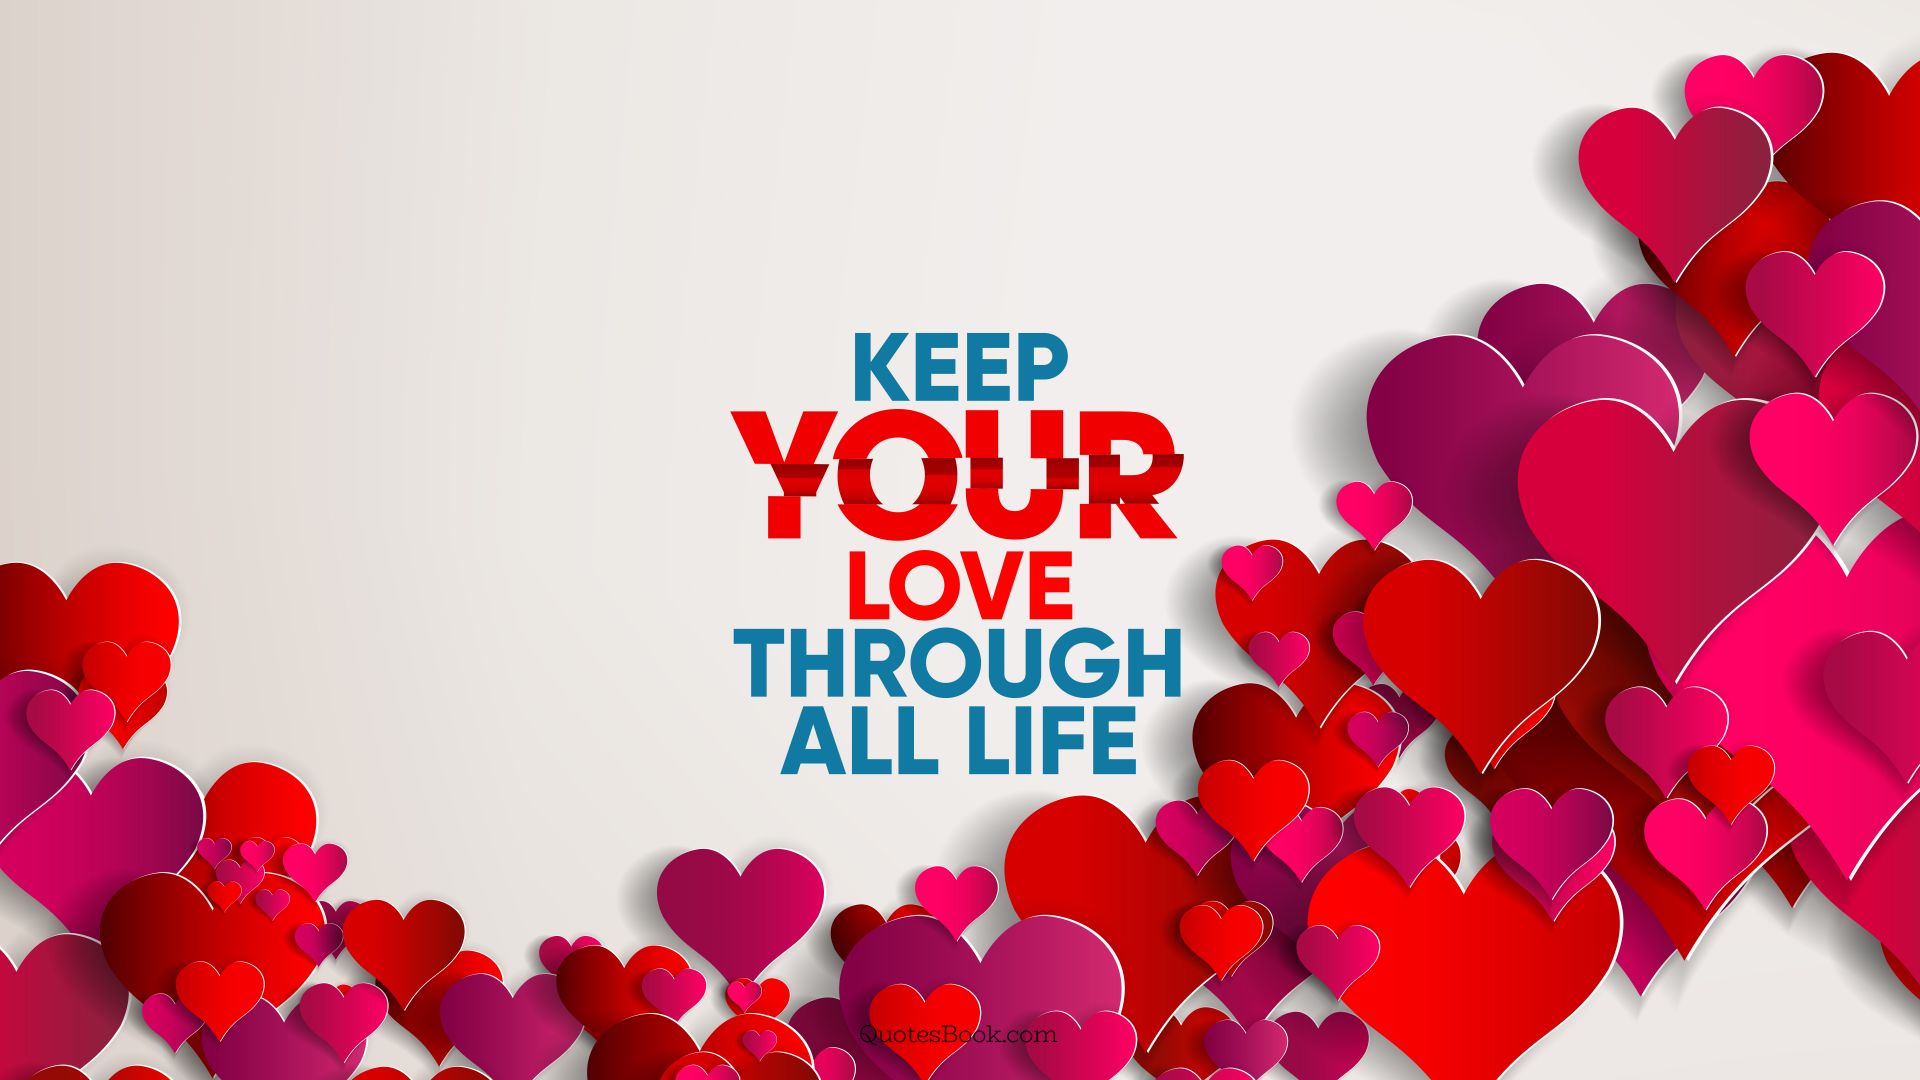 Keep your love through all life. - Quote by QuotesBook